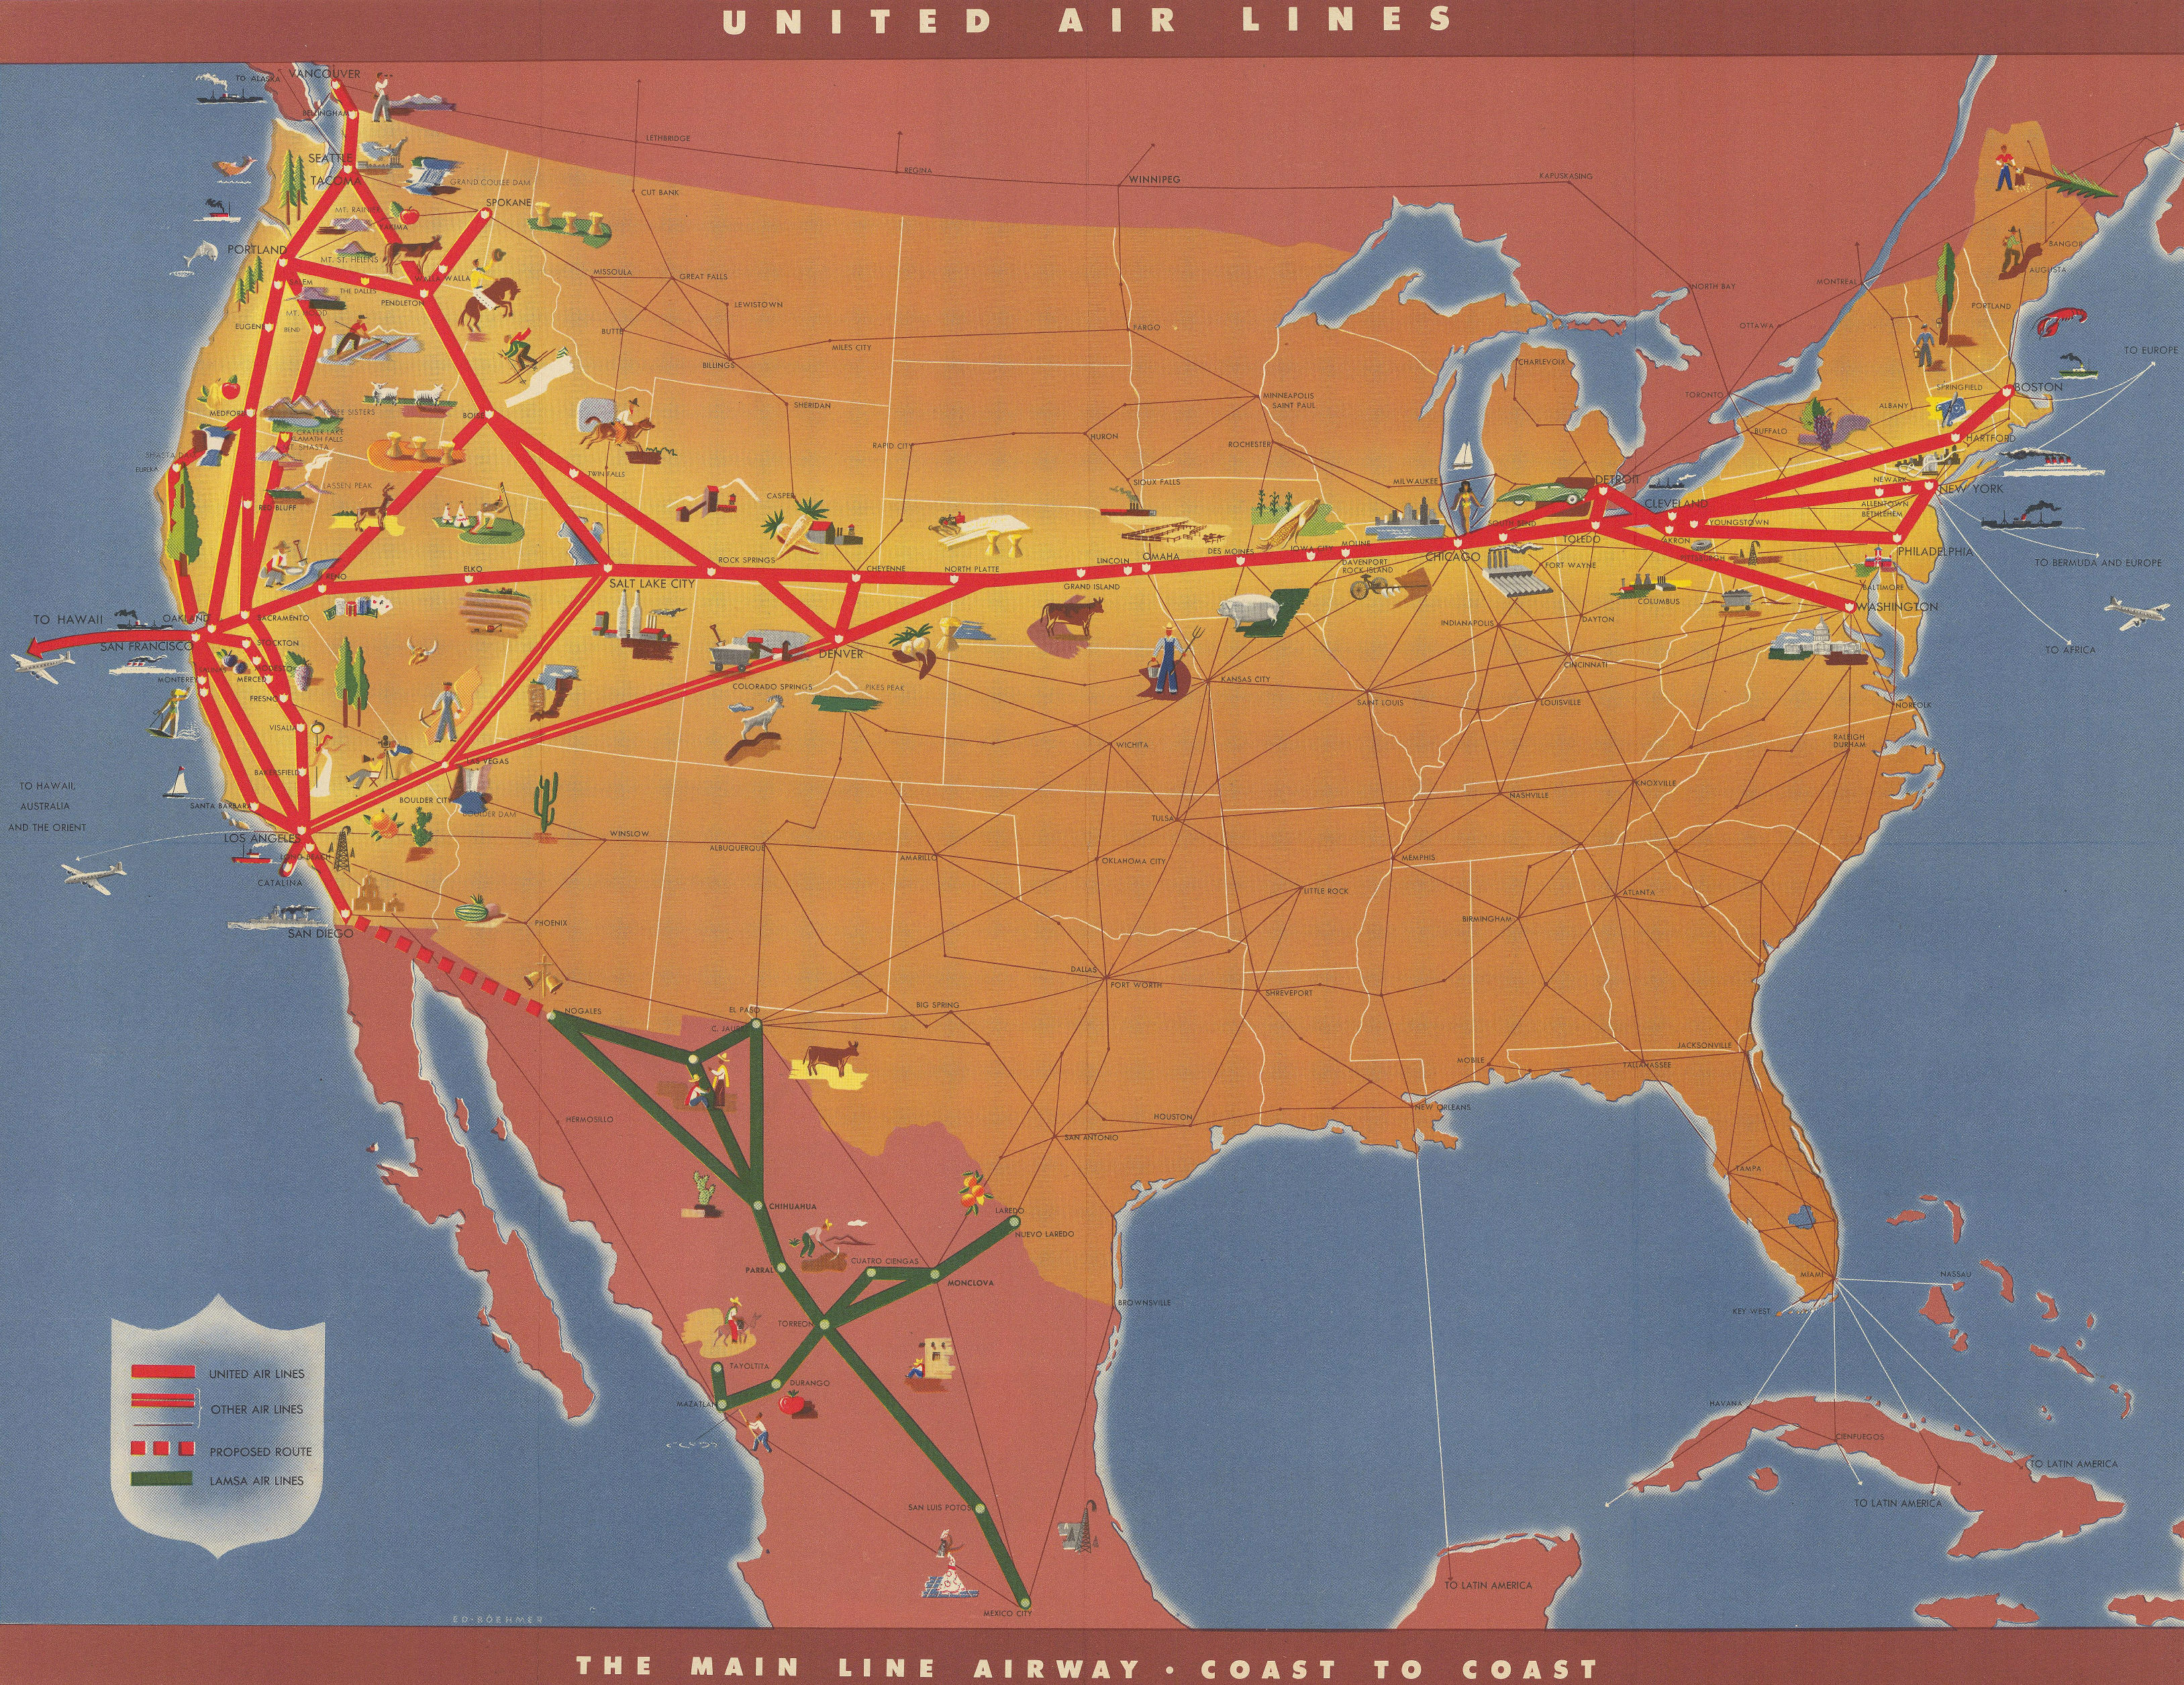 Associate Product United Air Lines. The main line airway. Pictorial network route map 16"x21" 1946